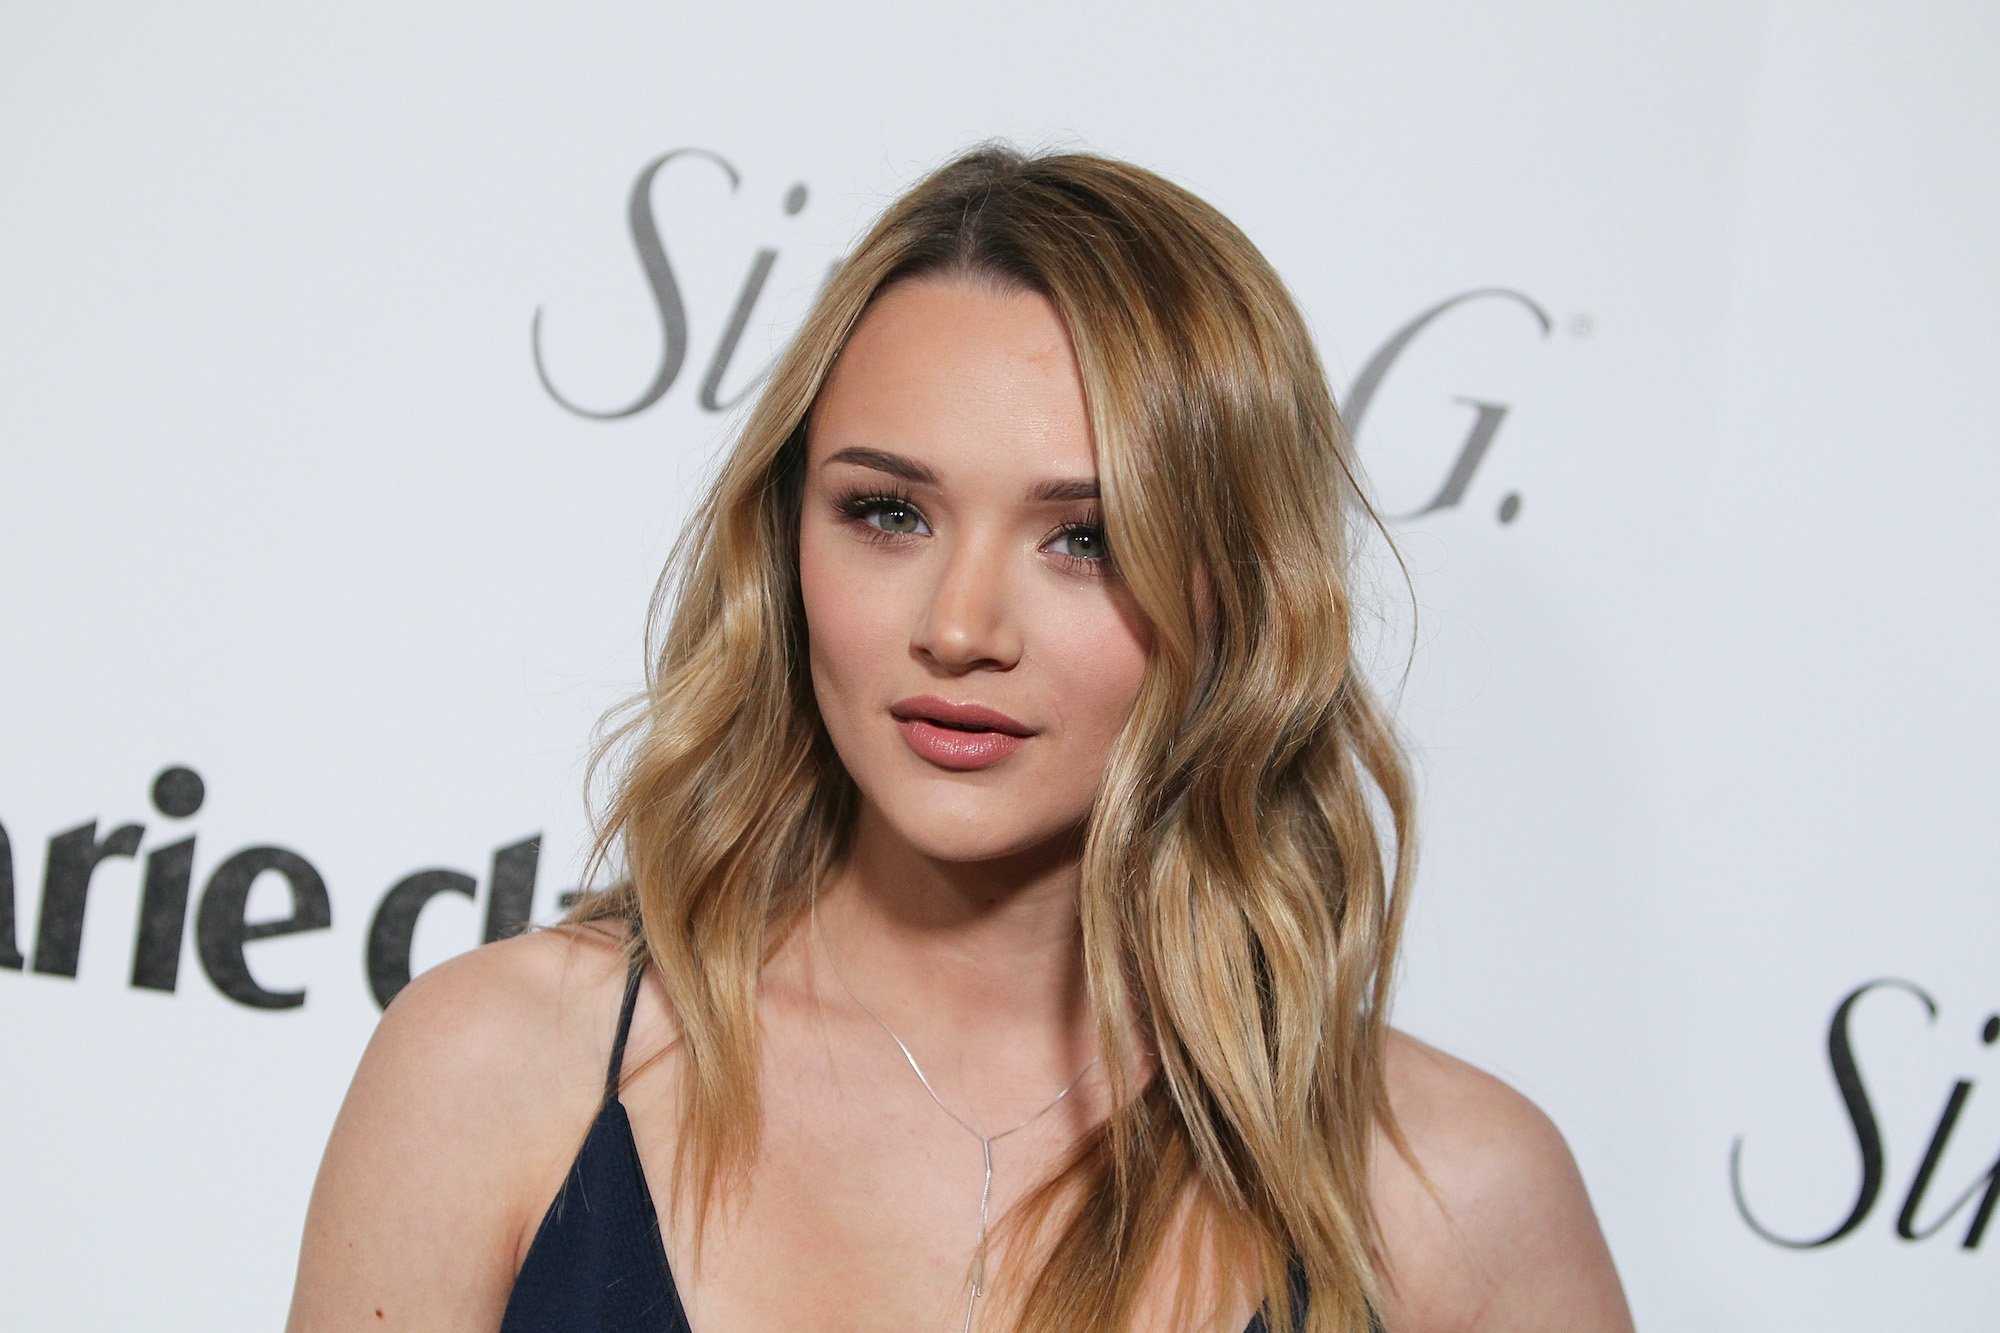 Hunter King smiling in front of a white backdrop